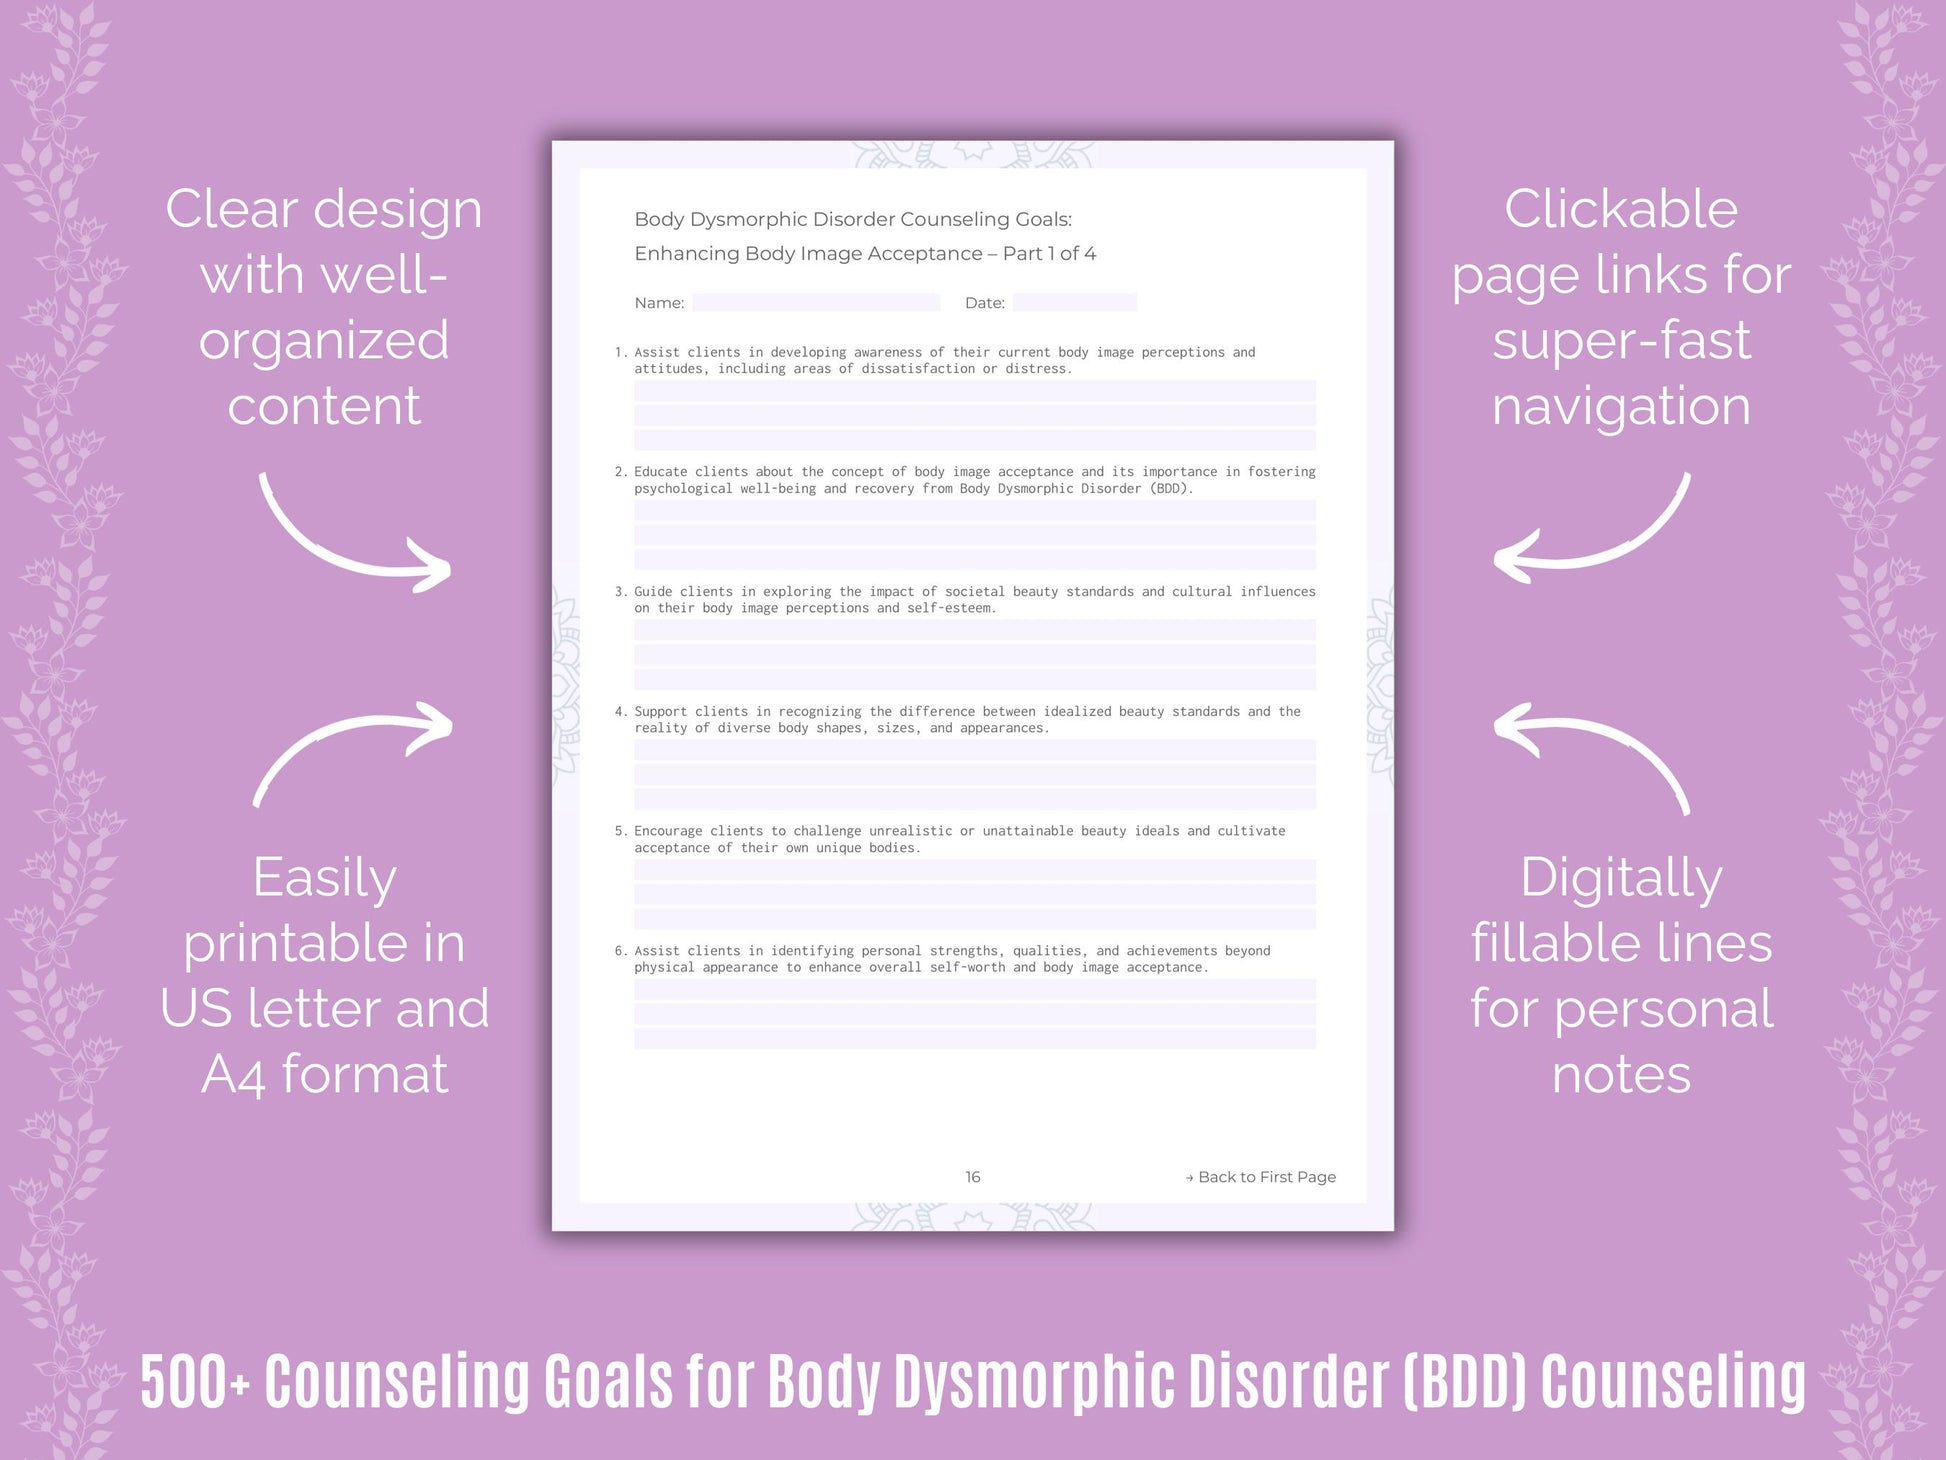 Body Dysmorphic Disorder (BDD) Counseling Goals Resource